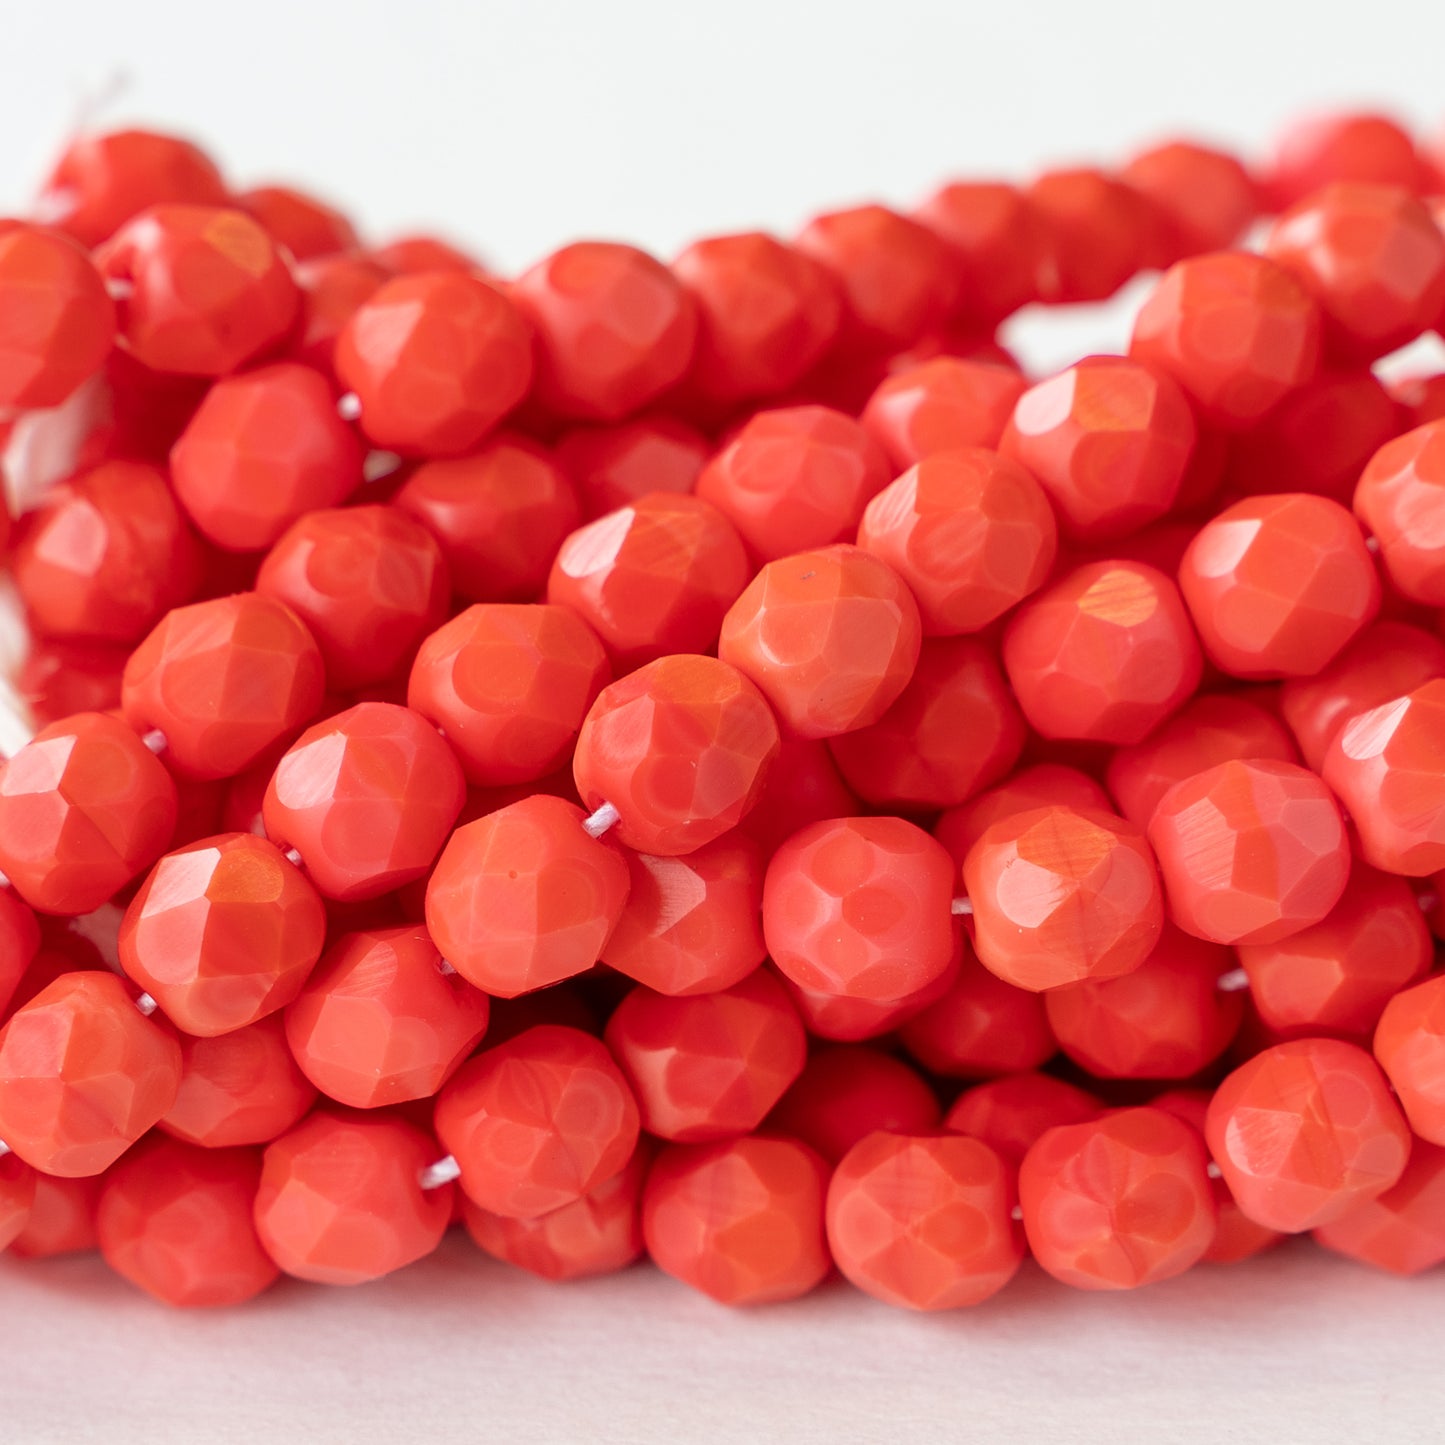 6mm Round Firepolished Beads - Opaque Coral Red - 25 beads